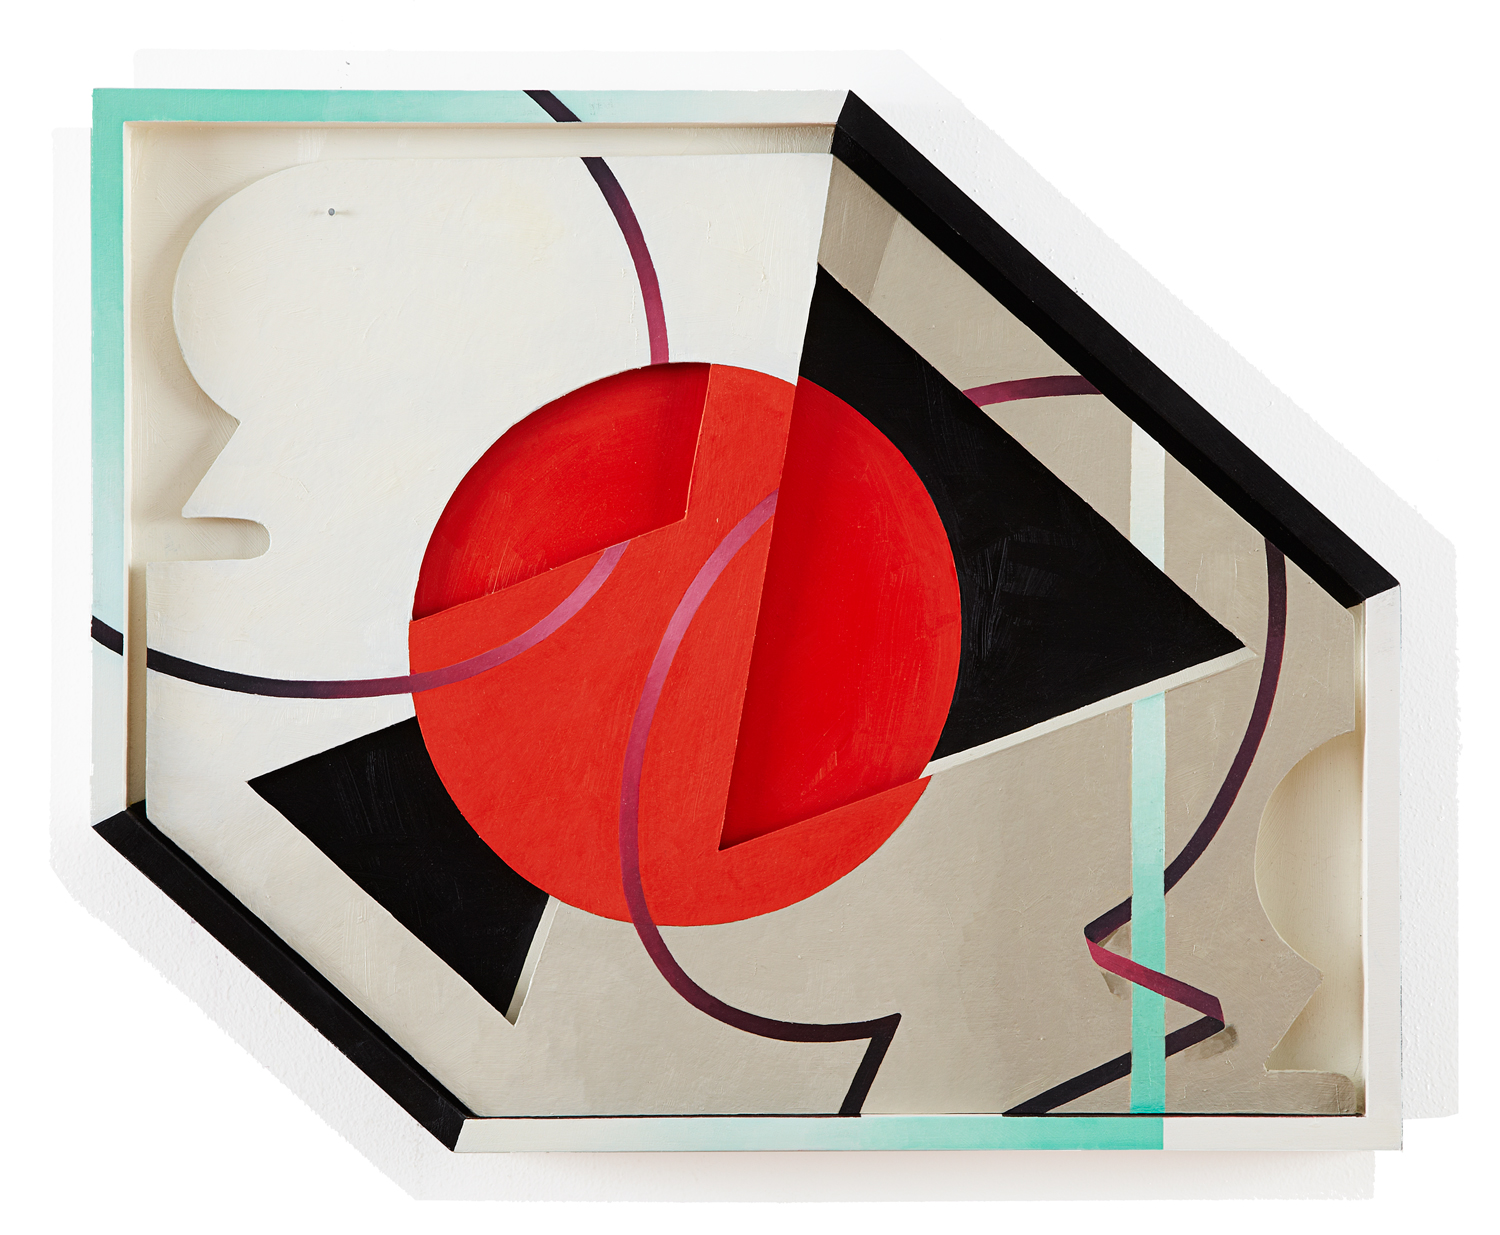   Shapes in a&nbsp;Shaped&nbsp;Box  20 x 25 in, Oil on&nbsp;shaped&nbsp;paper &amp;&nbsp;wood&nbsp;frame, 2012 